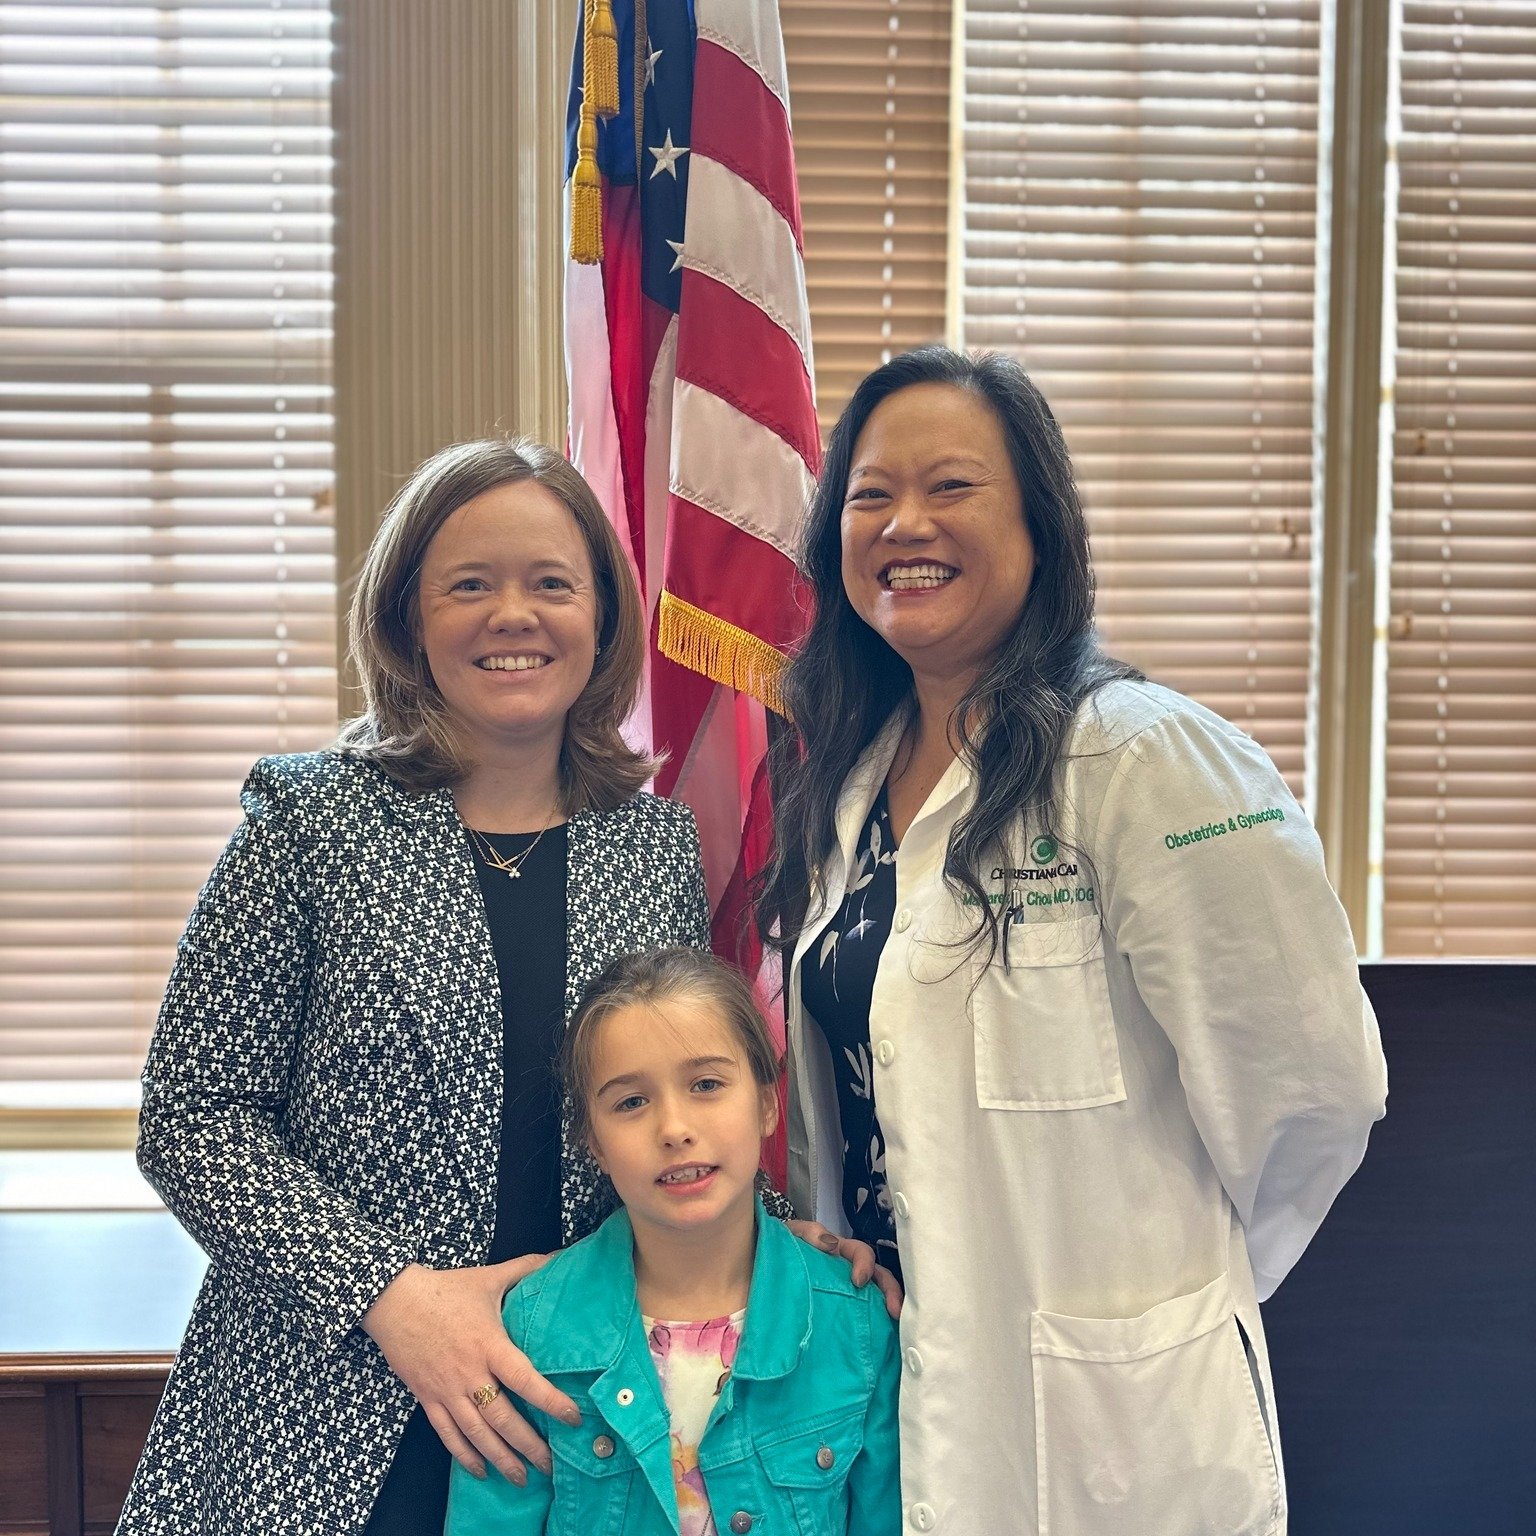 This past Thursday was a double feature! Ellen joined for Take Your Child to Work Day and I hosted Women's Caucus with co-chair Representative Cyndie Romer where we welcomed guests who spoke about the need for more statewide investments in women's he